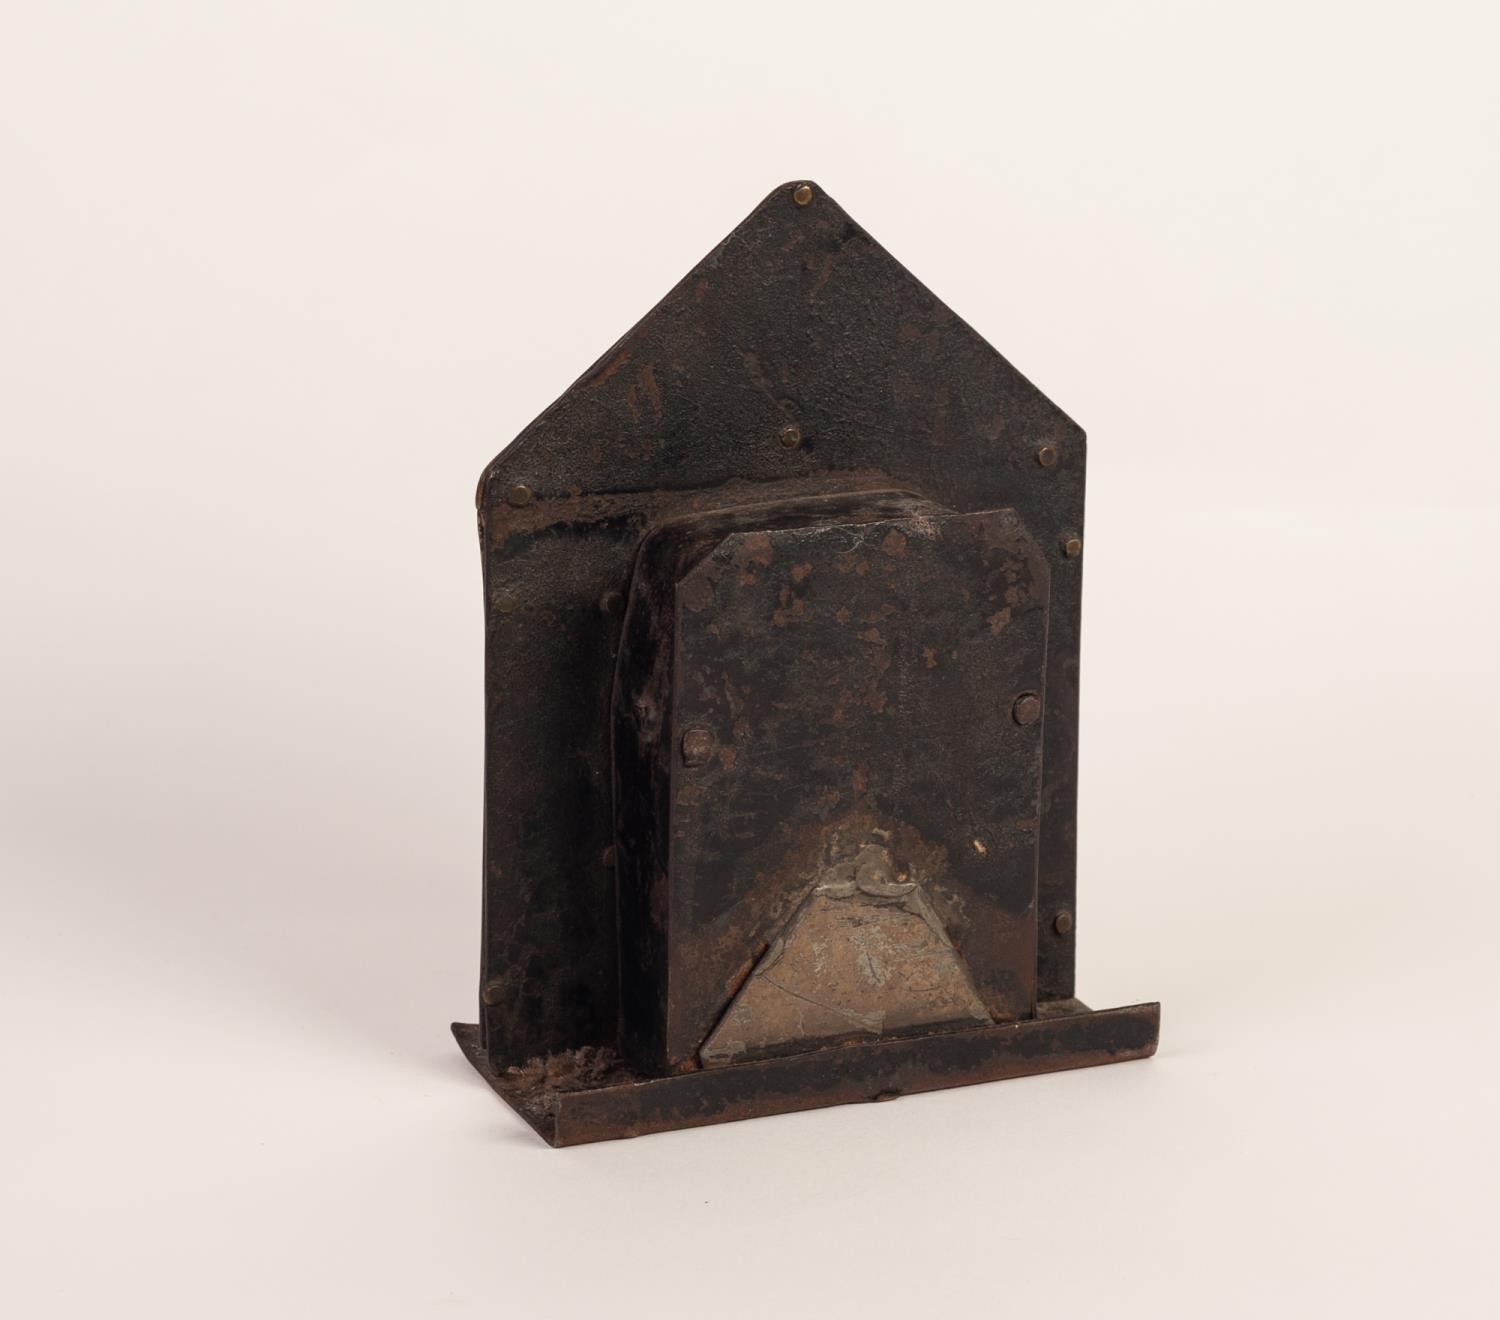 LATE 19th/EARLY 20th CENTURY CAST BRASS AND PLATE METAL MONEY BANK in the form of a bank building - Image 2 of 2